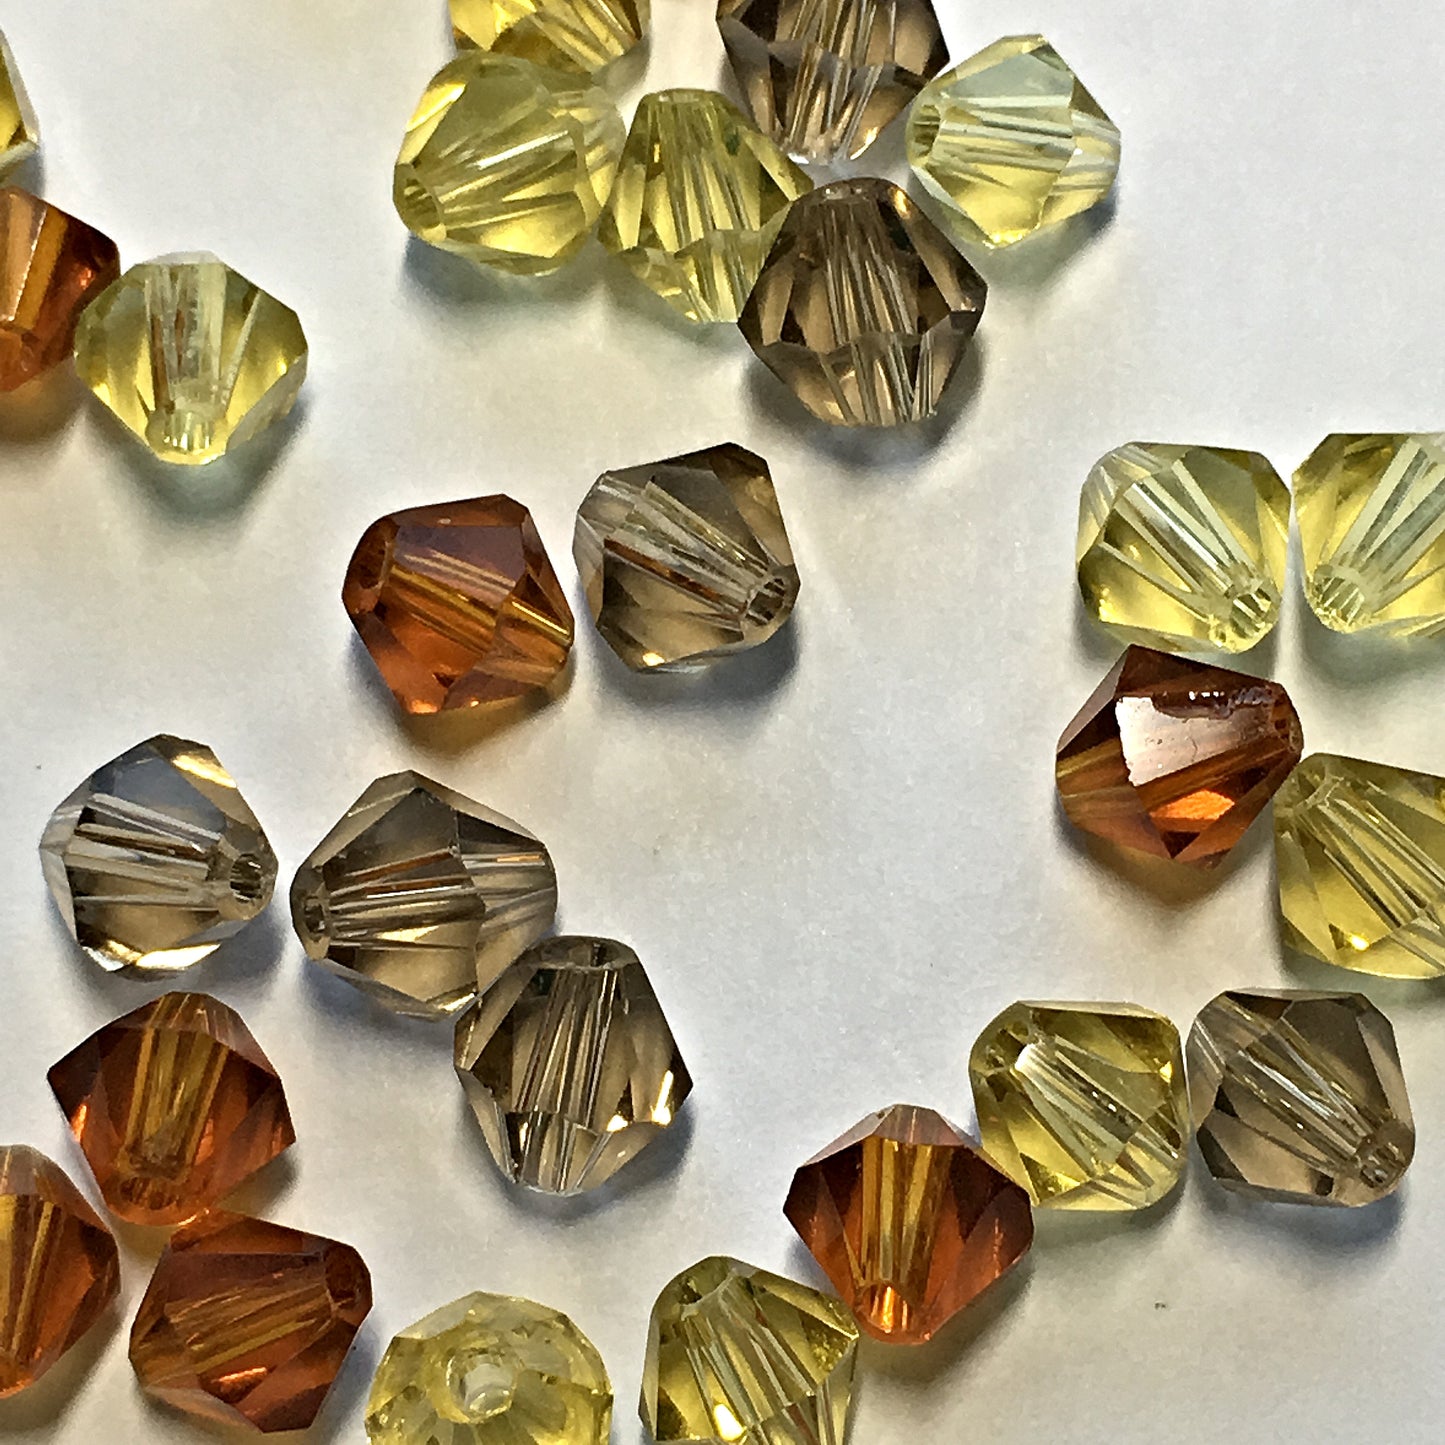 Jonquil, Topaz, Light Diamond Faceted Glass Bicone Bead Mix, 6 mm, 34 Beads